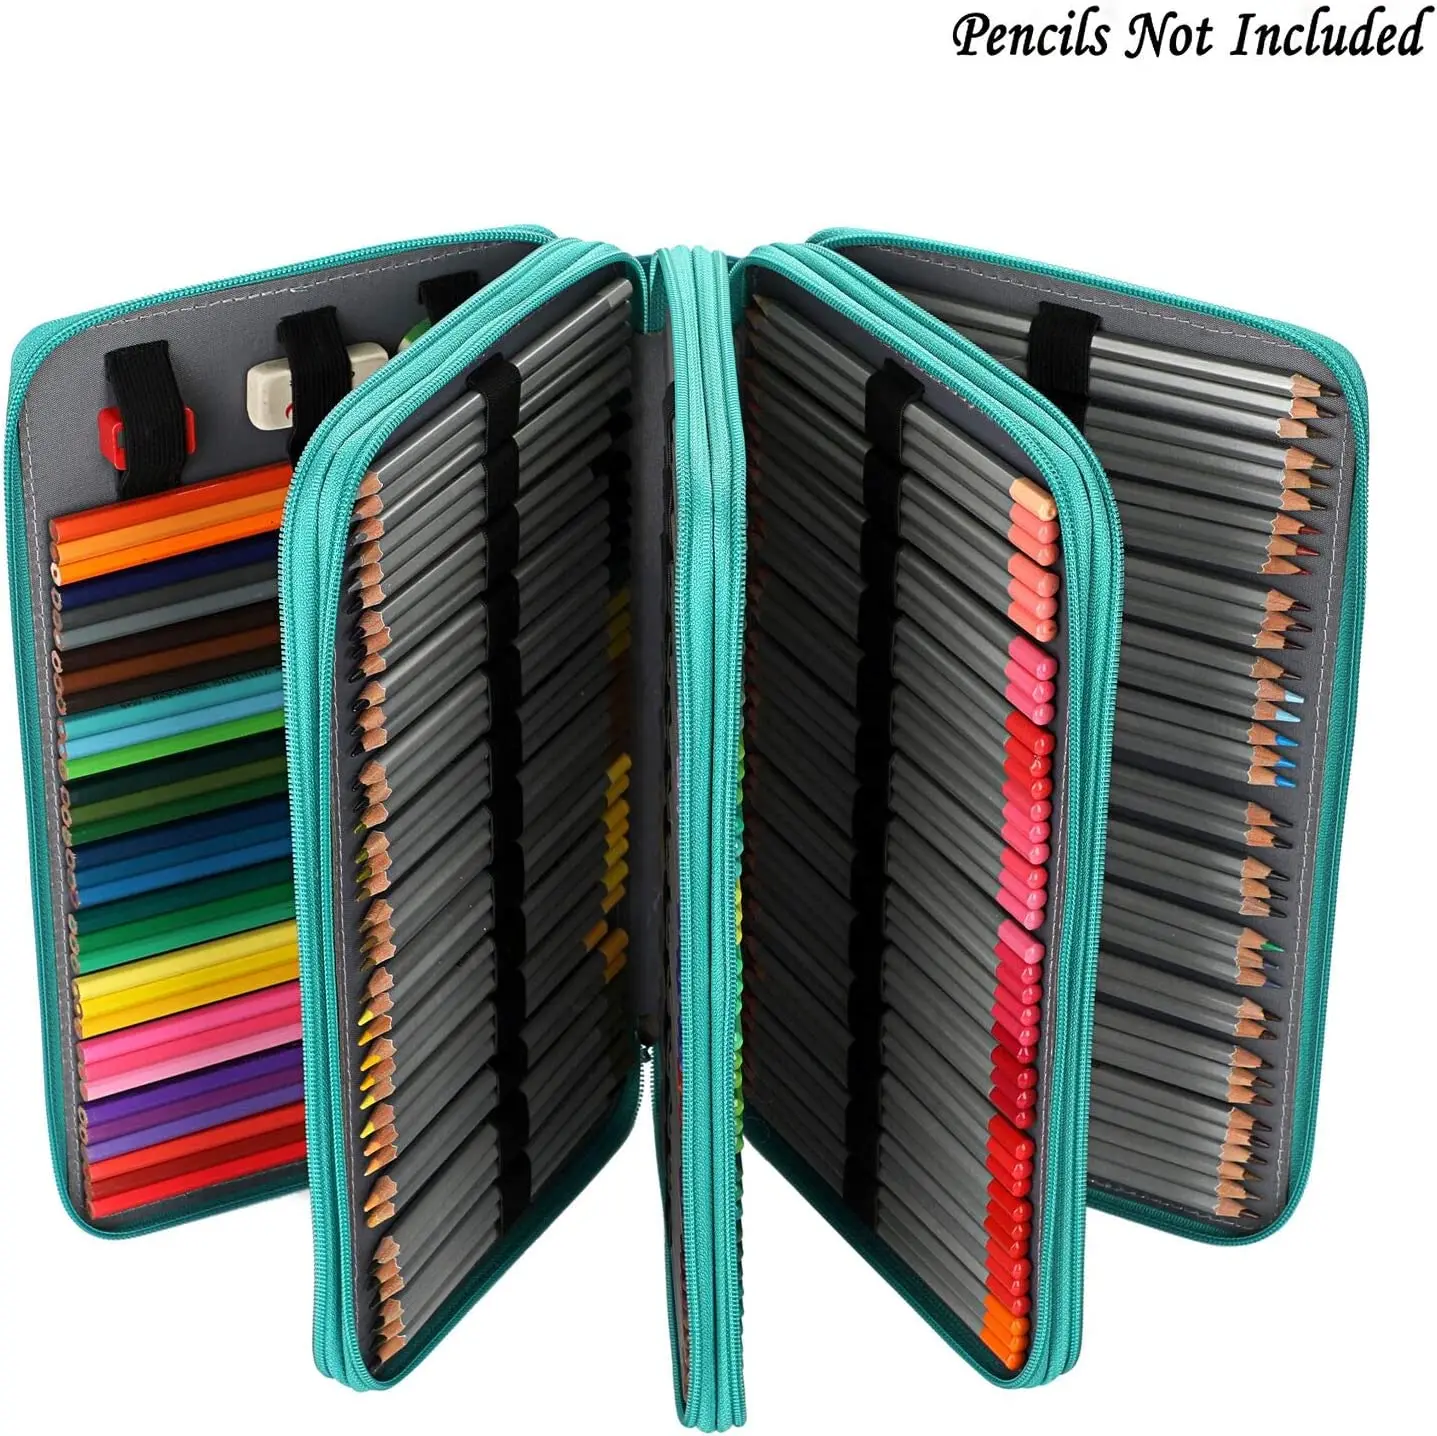 300 Slots Colored Pencil Organizer - Deluxe PU Leather Pencil Case Holder  with Handle Strap Pencil Box Large for Colored Pencils - AliExpress